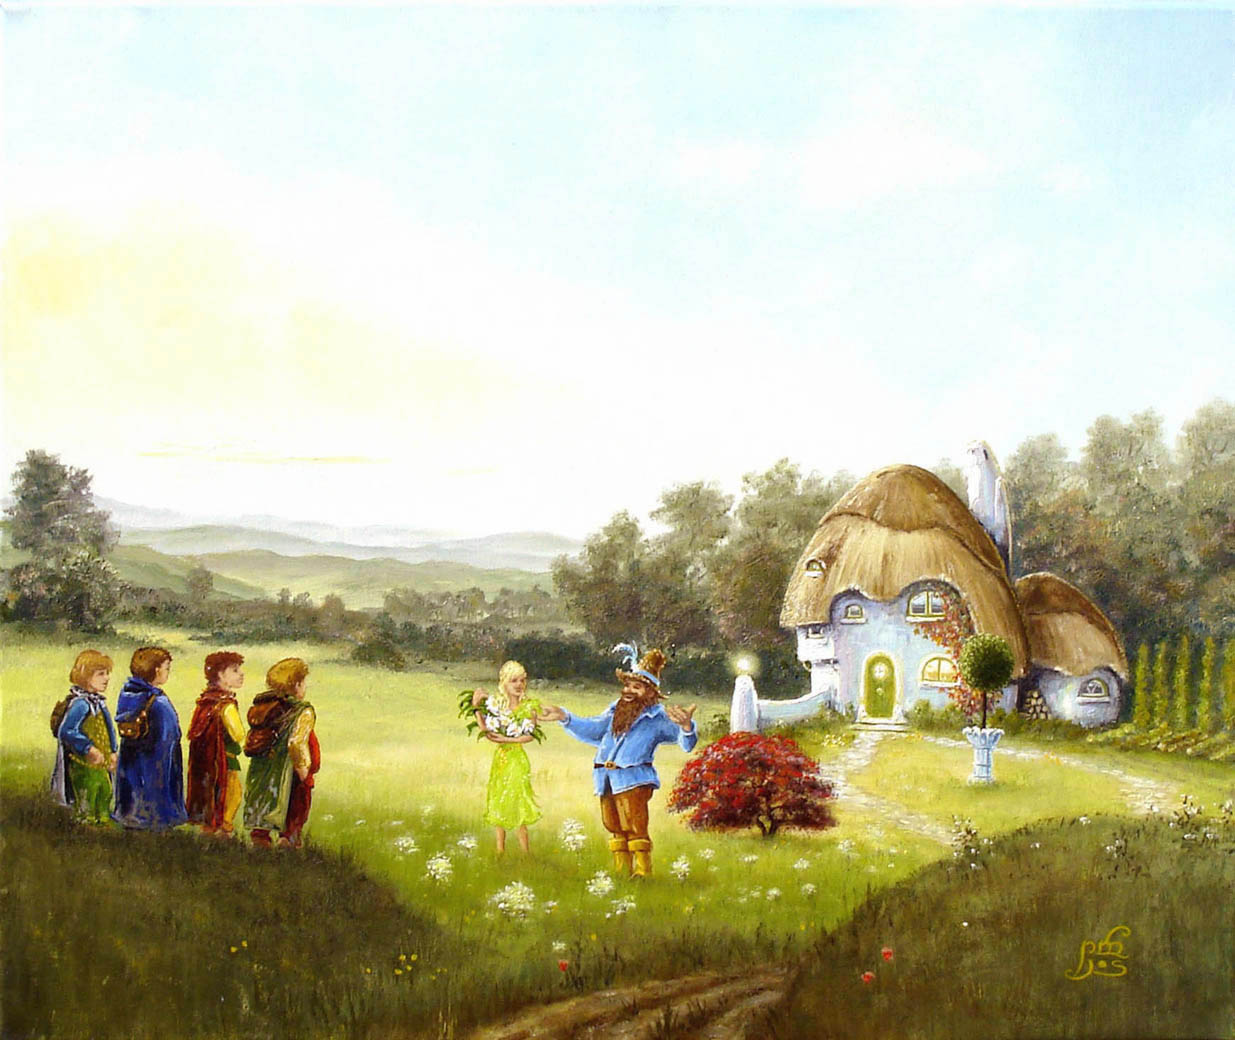 Tom Bombadil Frodo, Sam, Merry and Pippin are greeted by Tom Bombadil and Goldberry. 